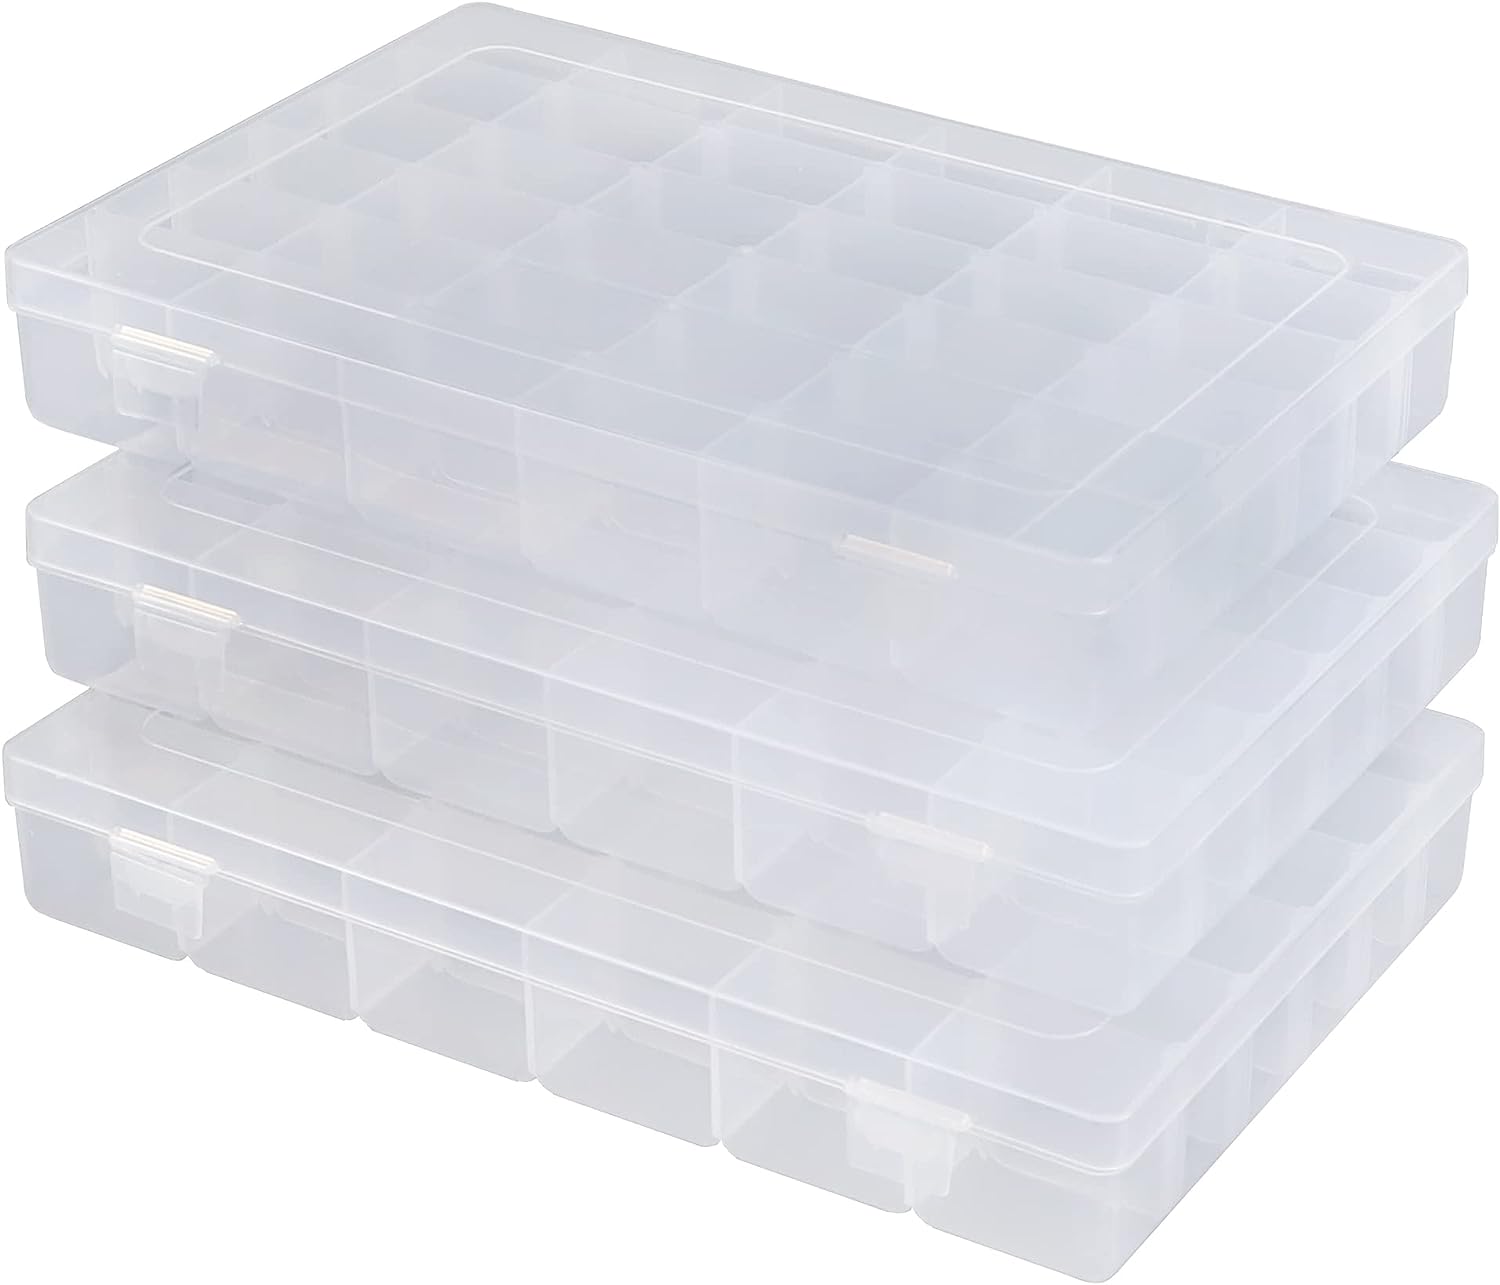 Clear Bead Storage Boxes WholeSale - Price List, Bulk Buy at